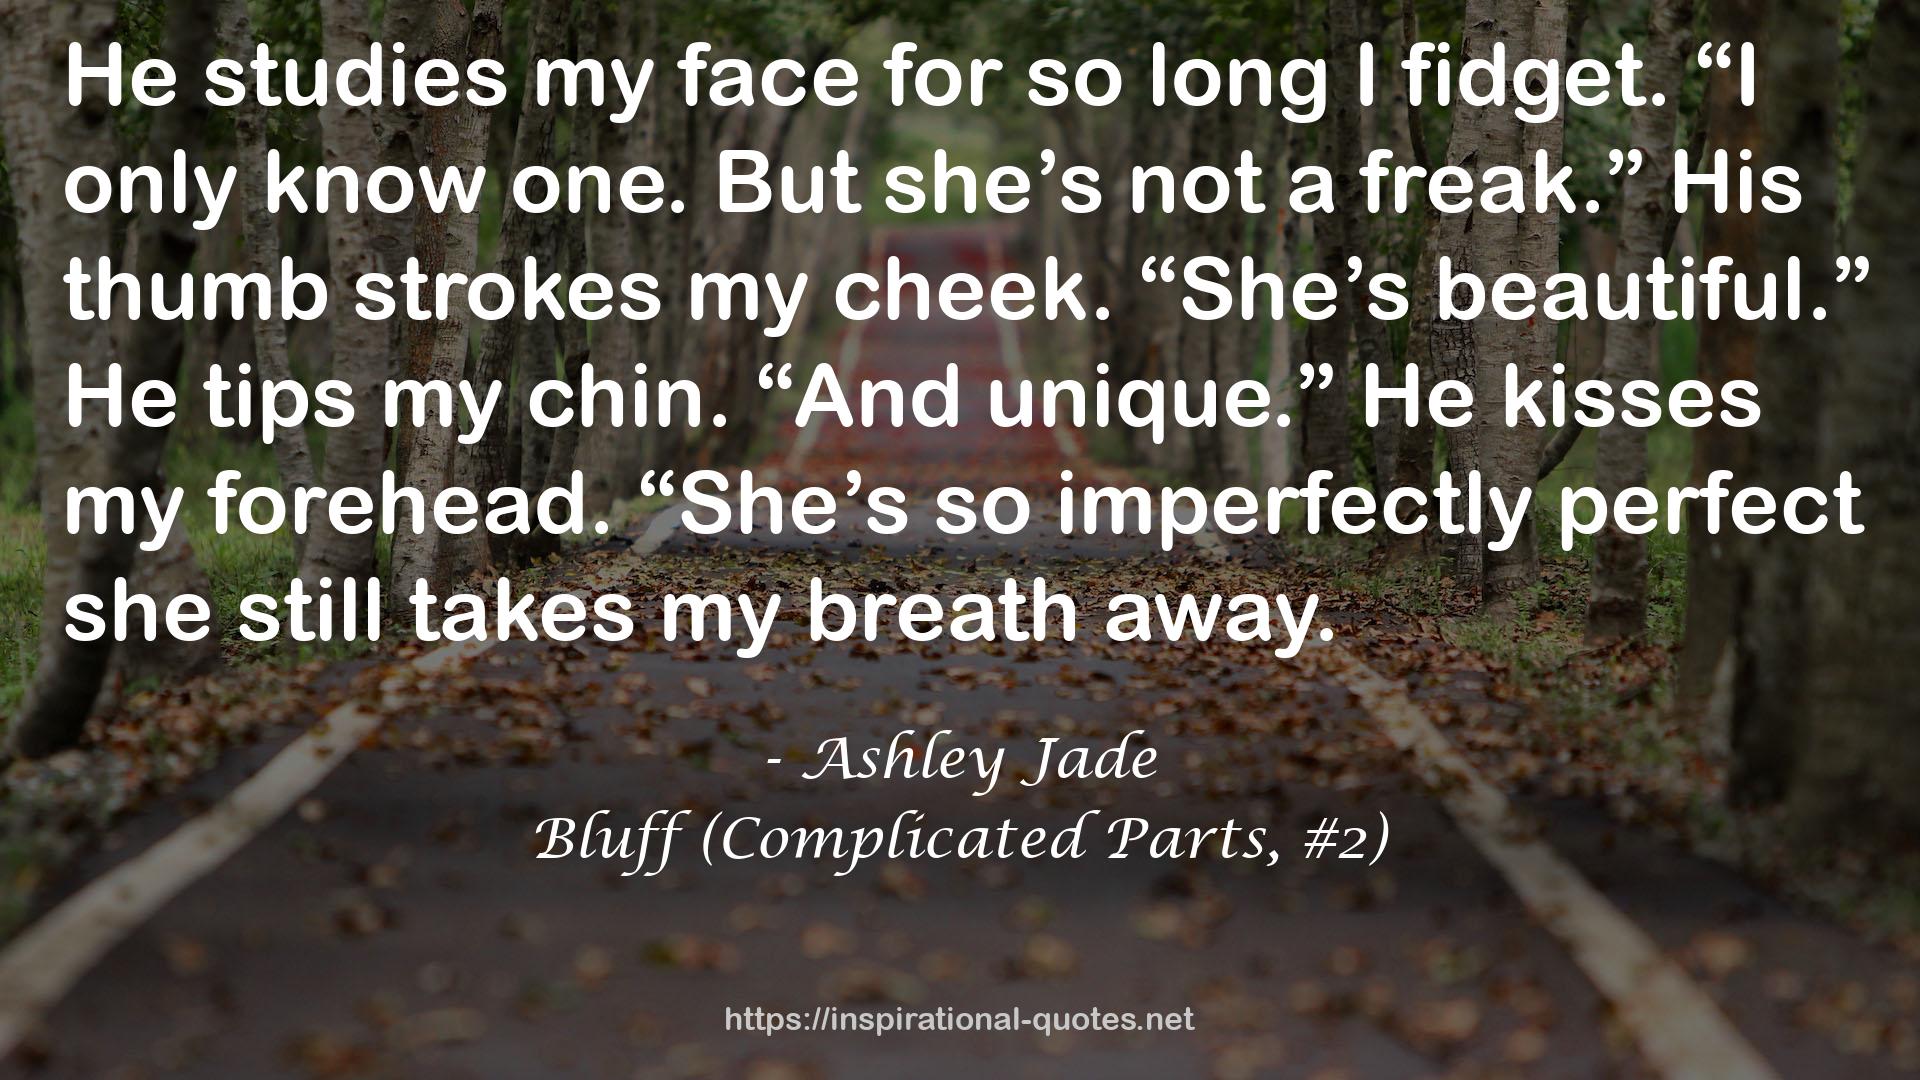 Bluff (Complicated Parts, #2) QUOTES